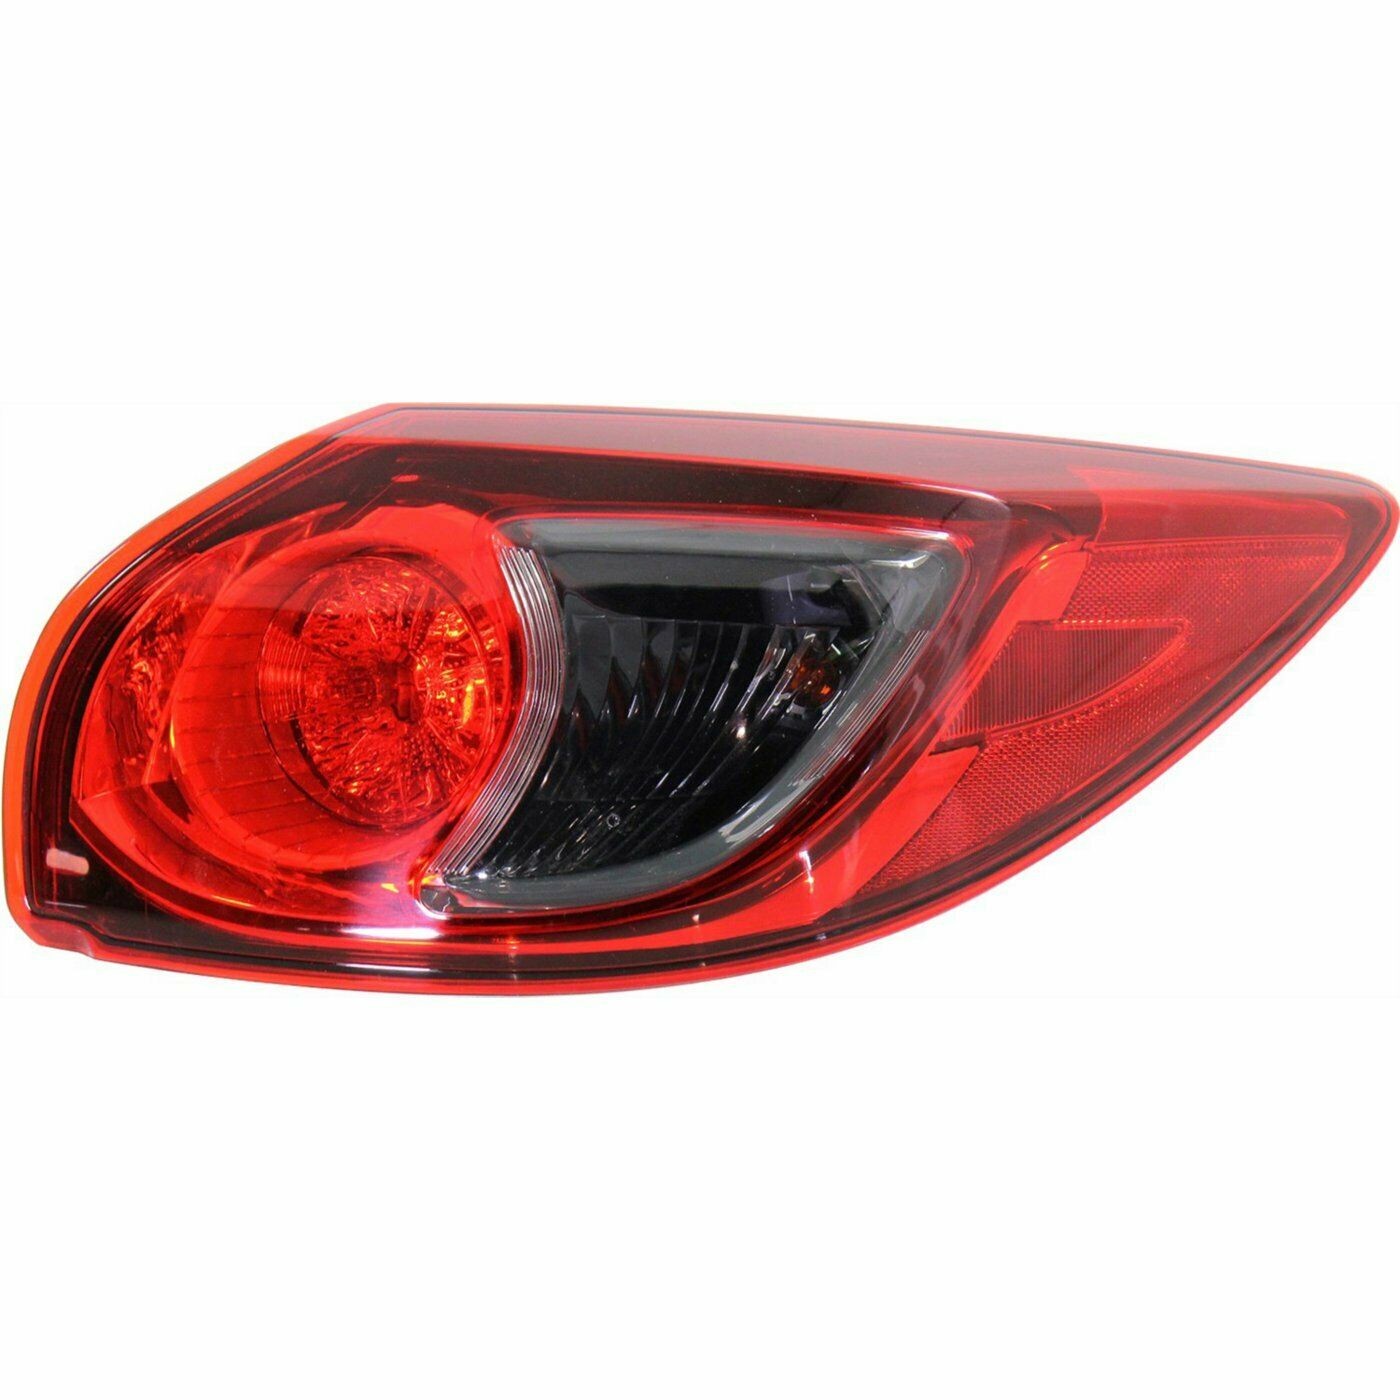 NEW RIGHT SIDE TAIL LAMP ASSEMBLY FOR 2013-2016 MAZDA CX-5 MA2805111